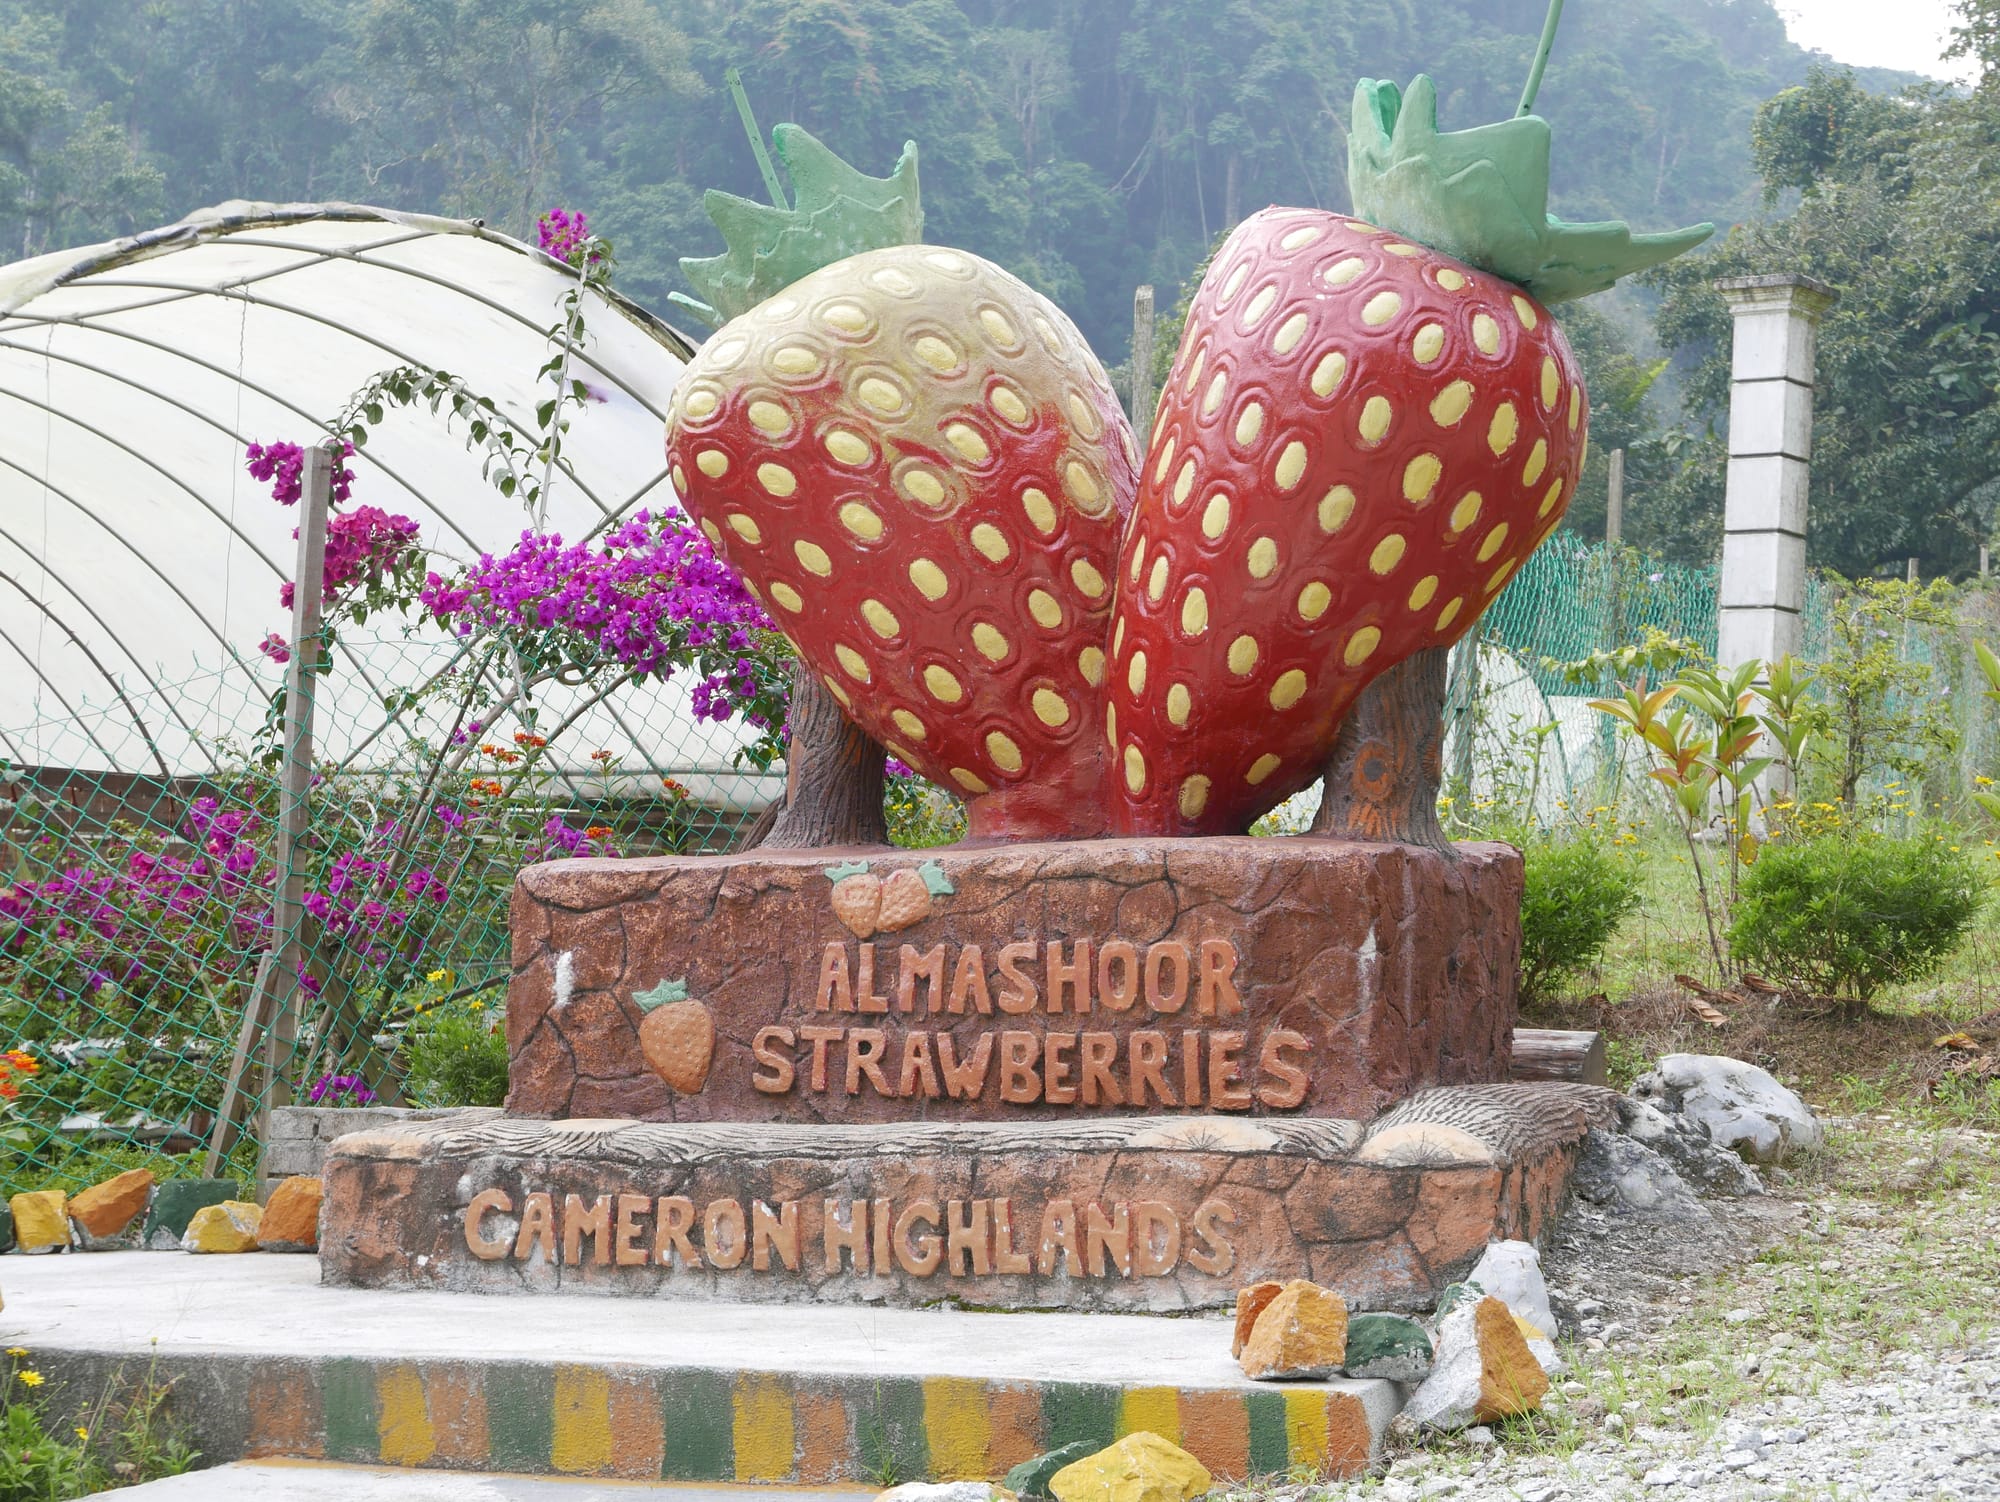 Photo by Author — Strawberries sculptures in the Cameron Highlands, Malaysia